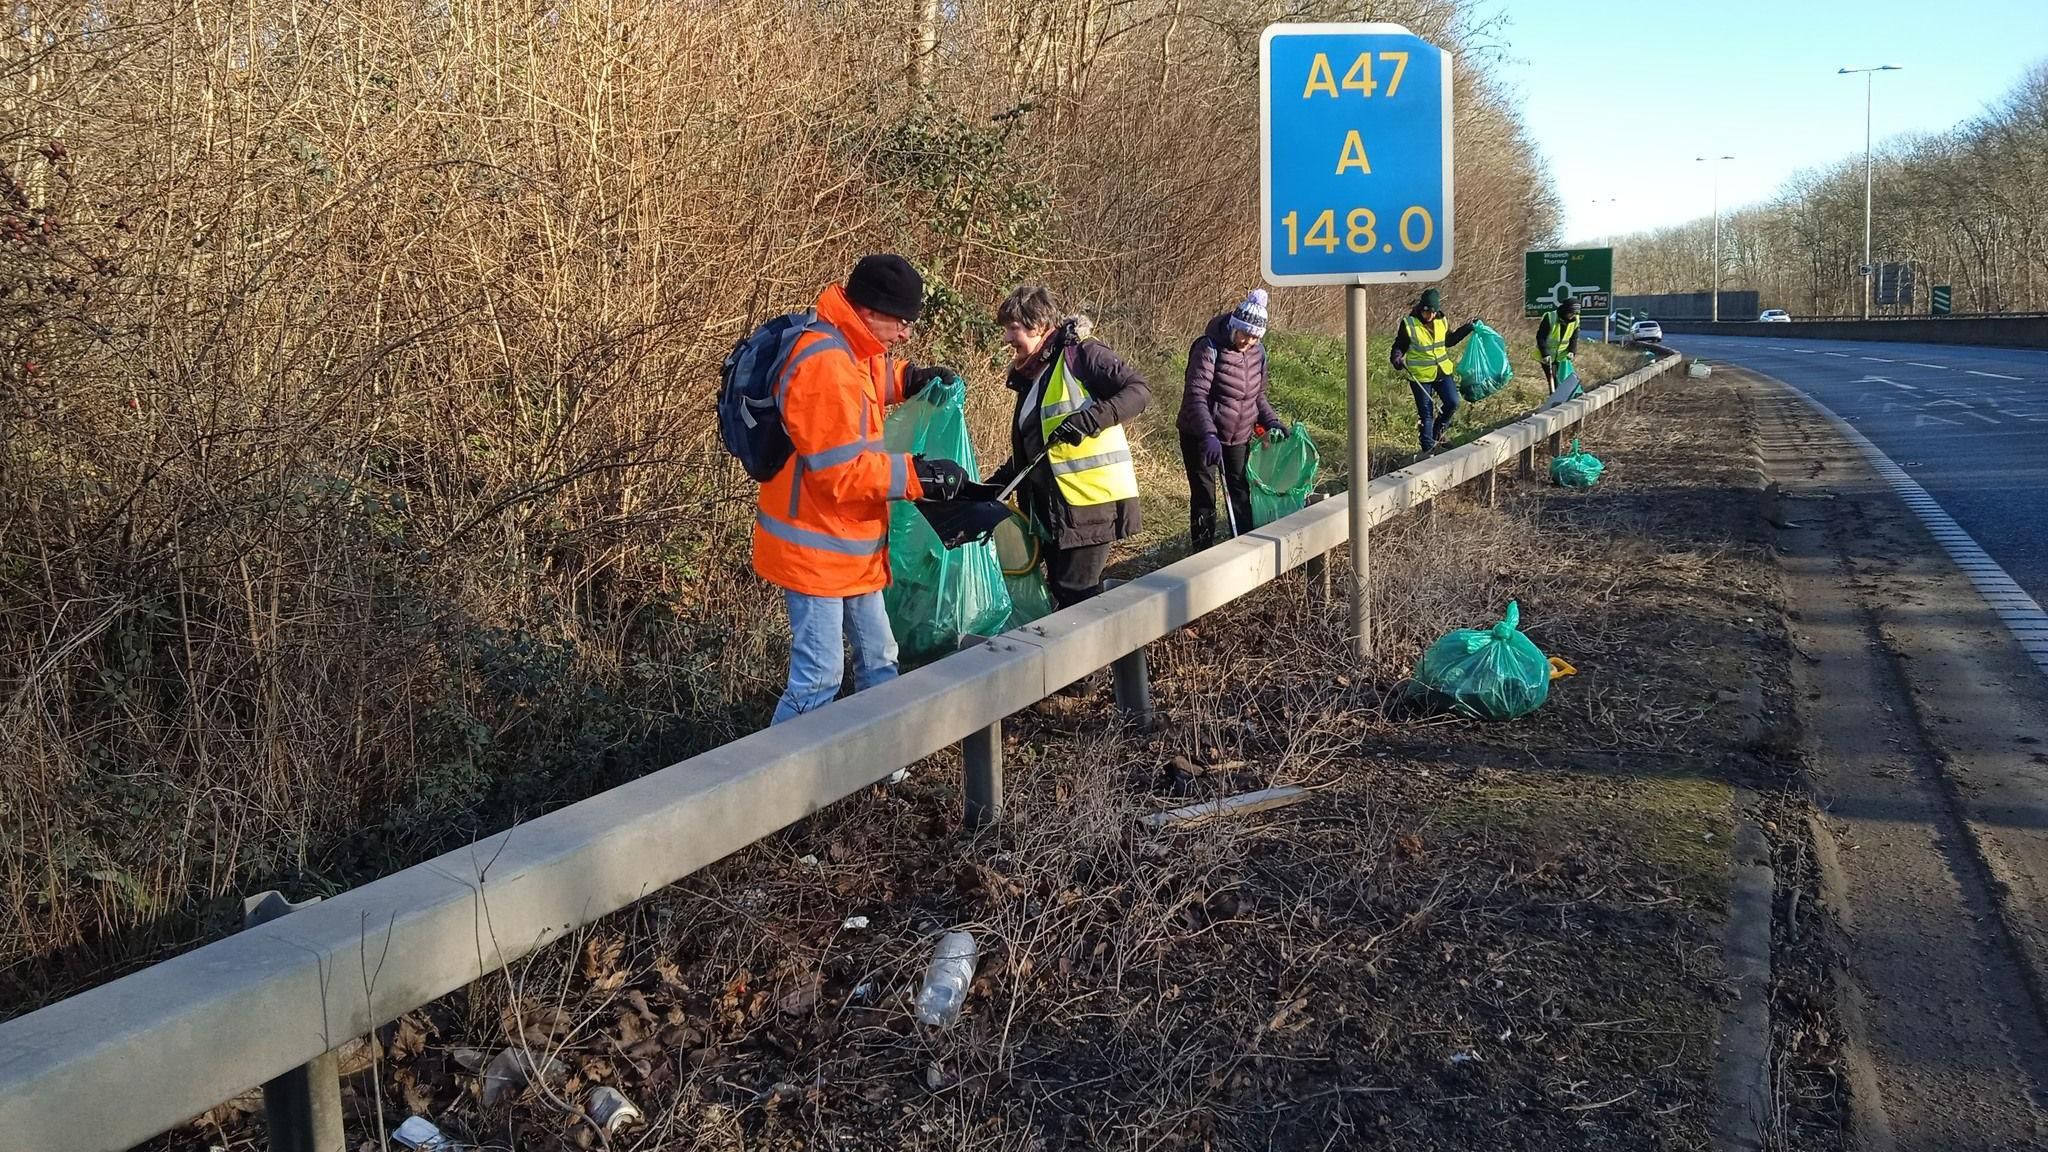 Litter pickers along the A47